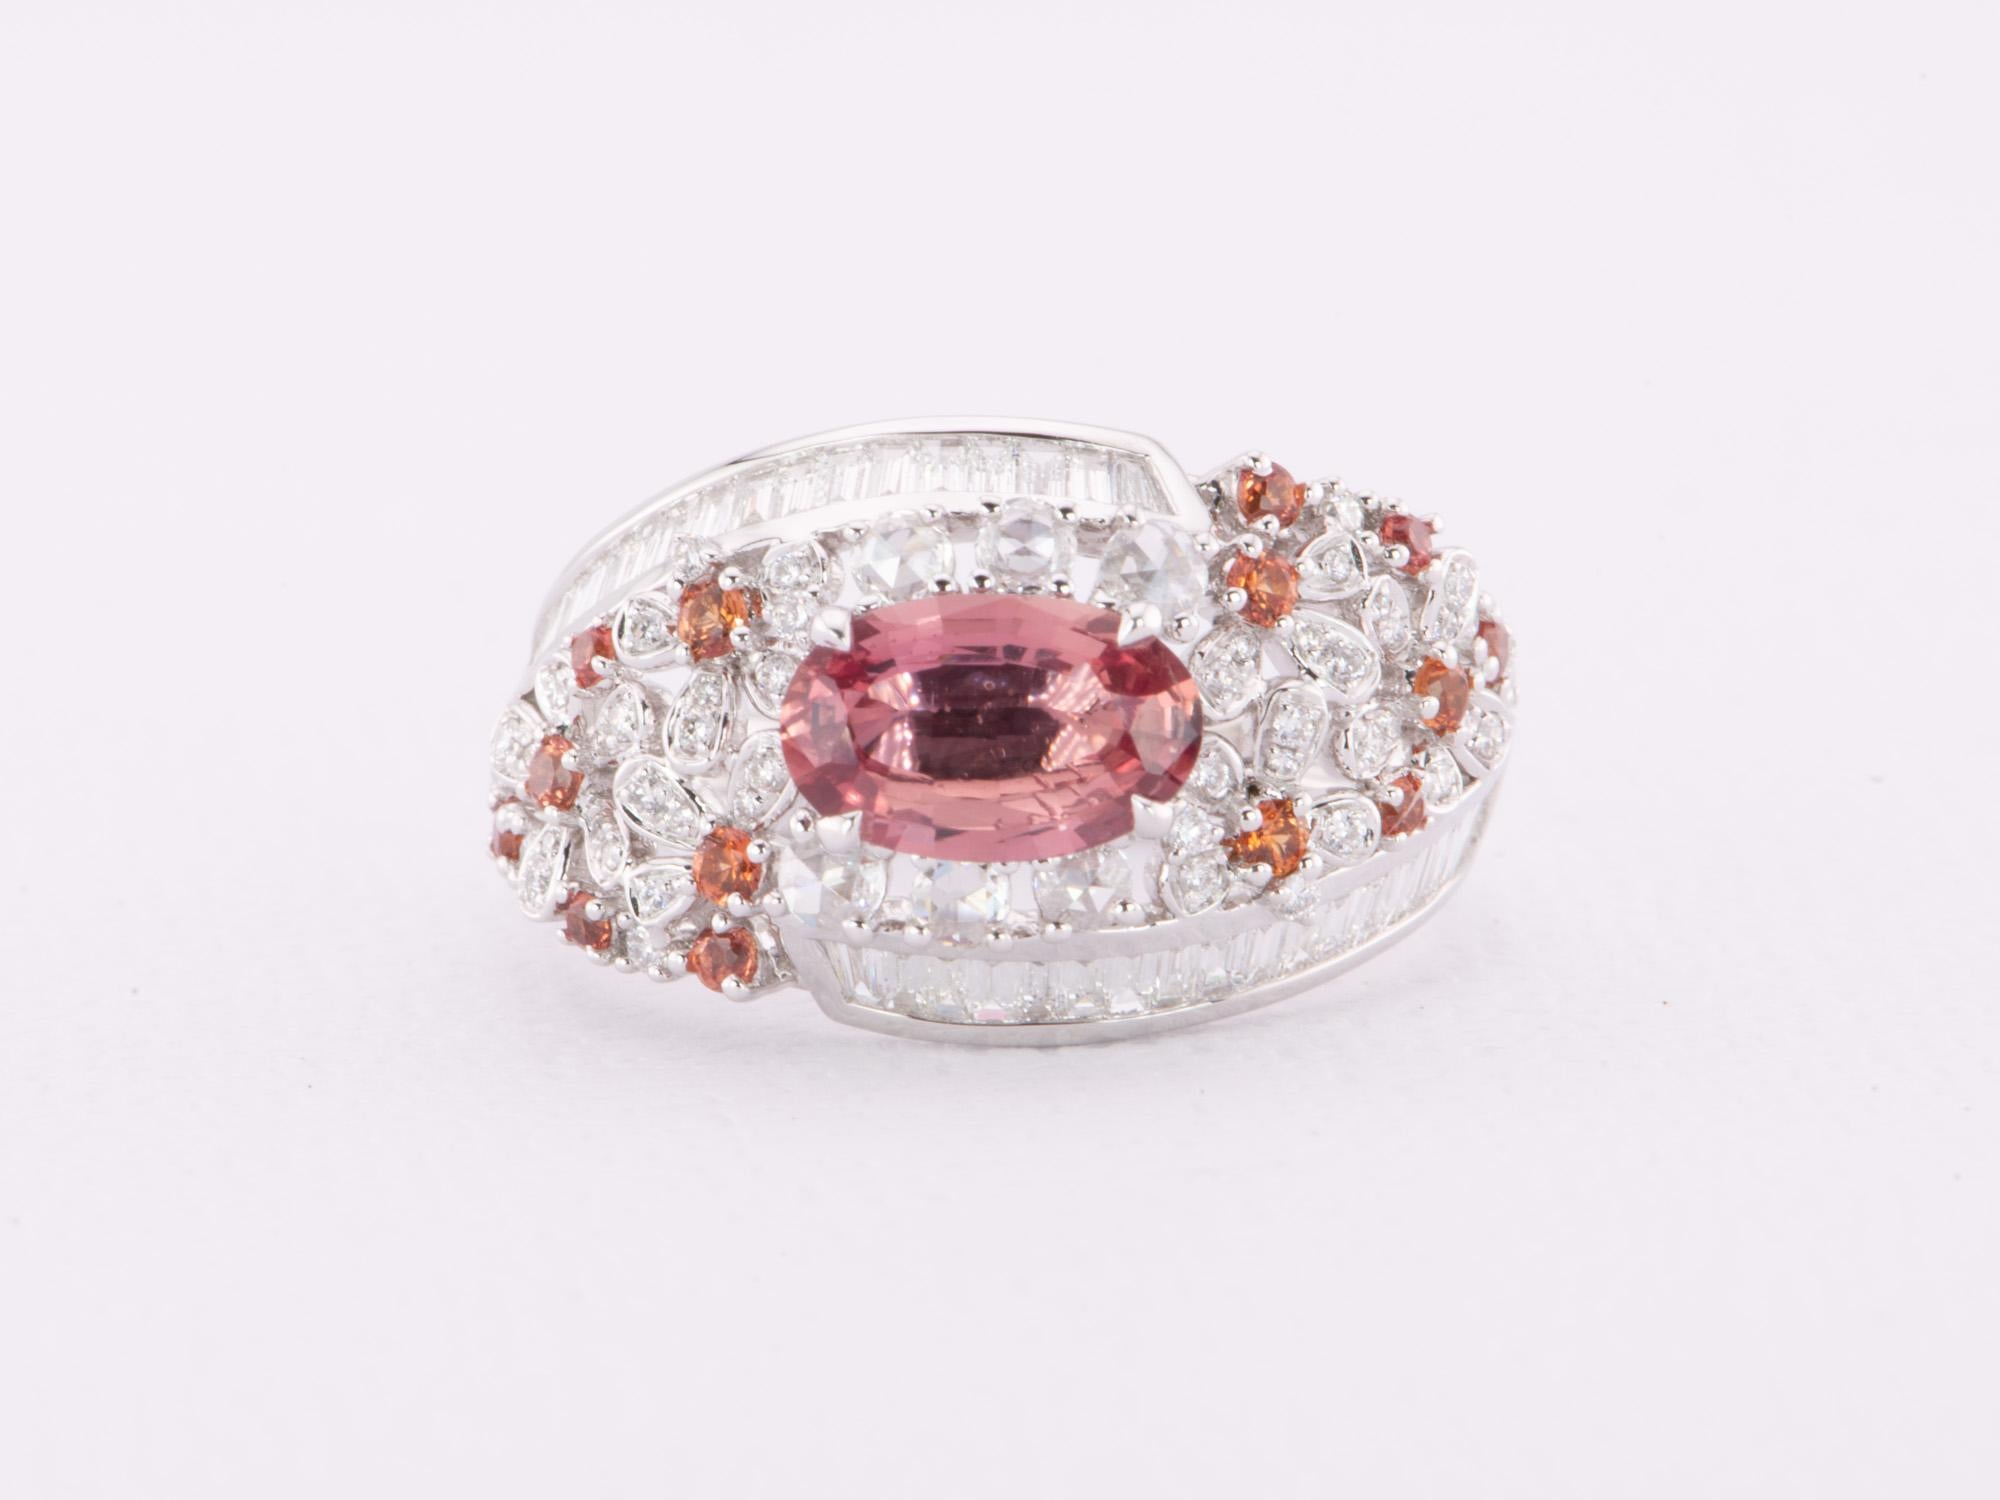 This stunning 1.12ct Padparadscha Sapphire and Diamond Ring in luxurious 18K White Gold will make your dreams come true. With a unique floral cluster design and a rare unheated sapphire, this elegant piece is sure to take your breath away. Shine